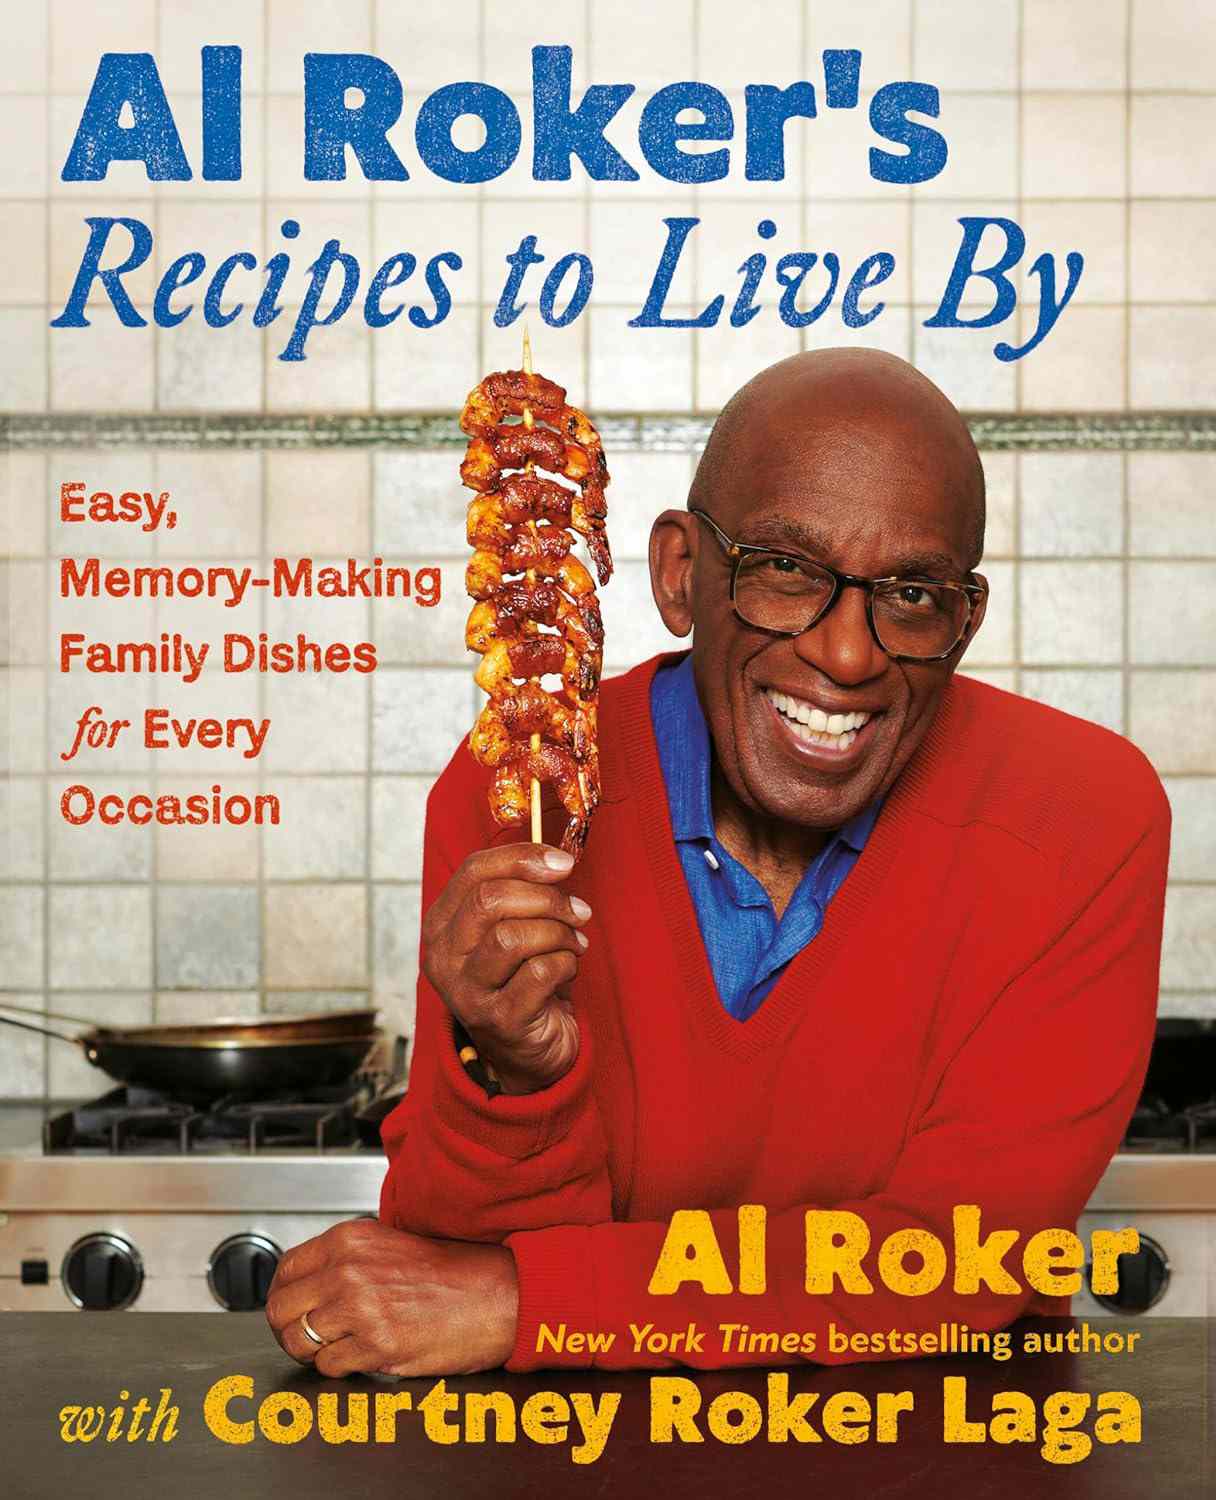 Al Roker Has a New Cookbook Coming, Which He Penned with His Chef Daughter While She Was Pregnant